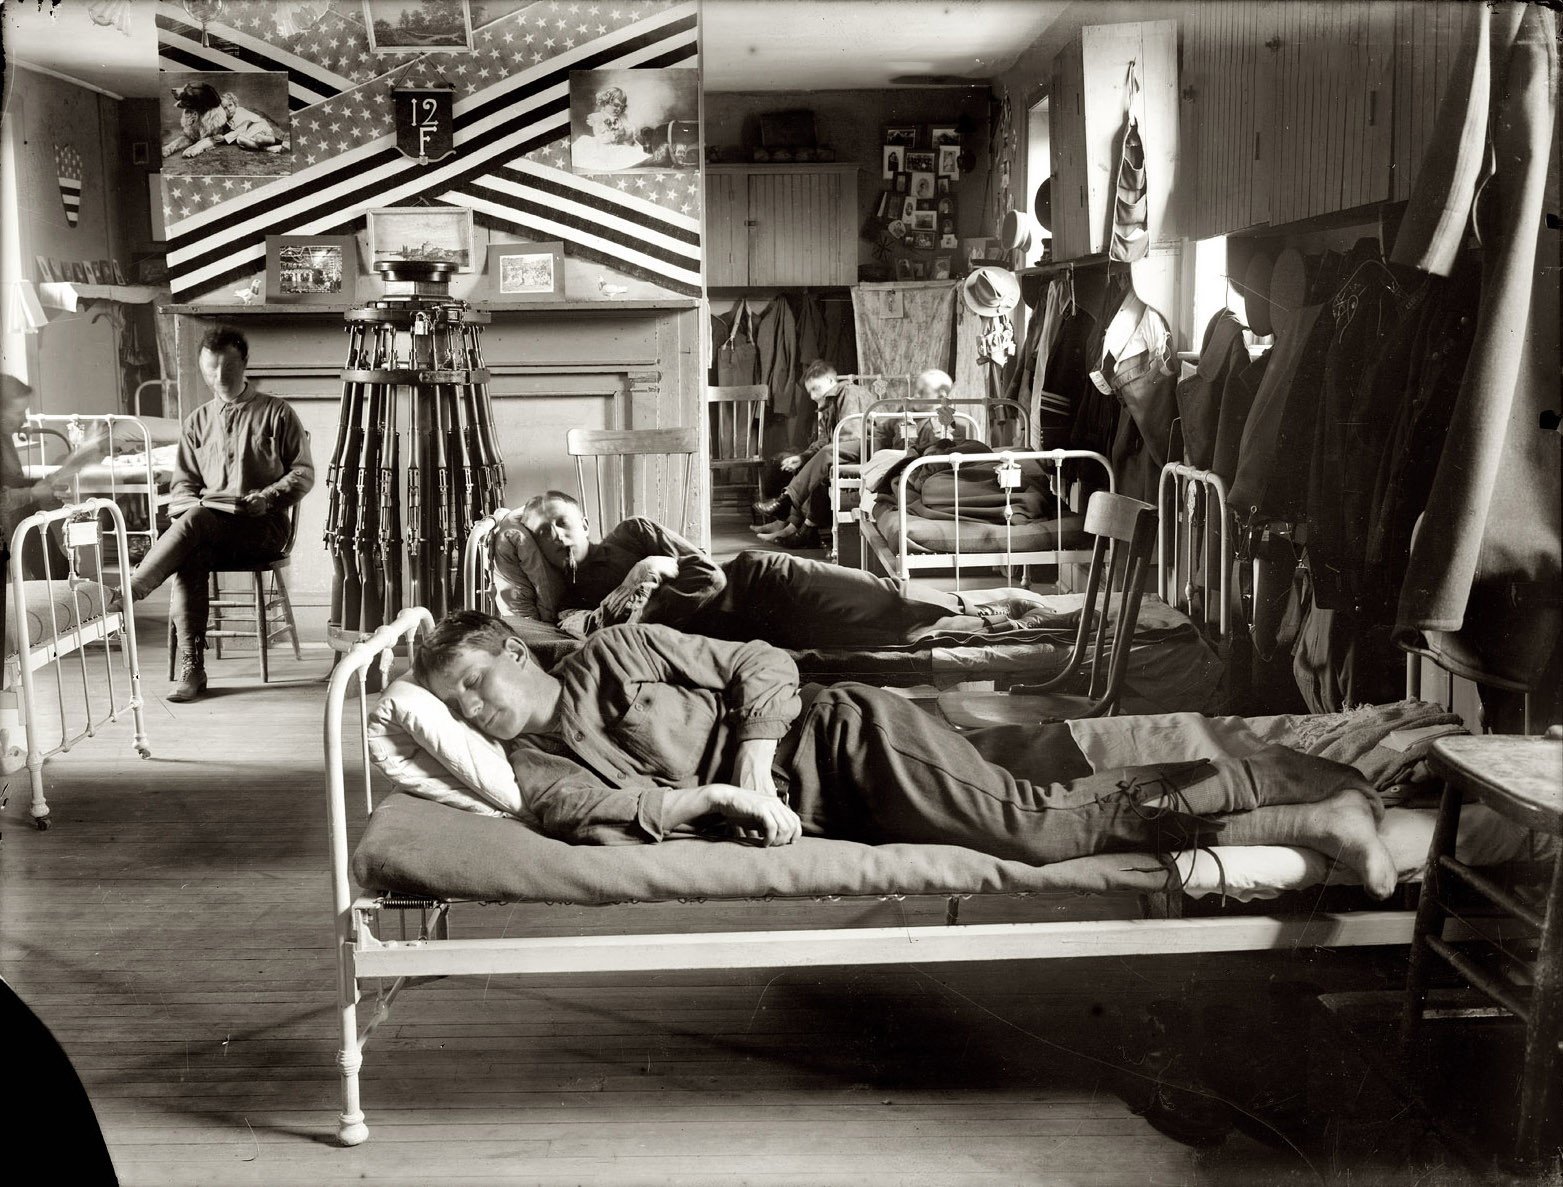 Company F, 12th Infantry. Soldiers in their bunks on Governor's Island circa 1908. View full size. 8x10 glass negative, George Grantham Bain Collection.